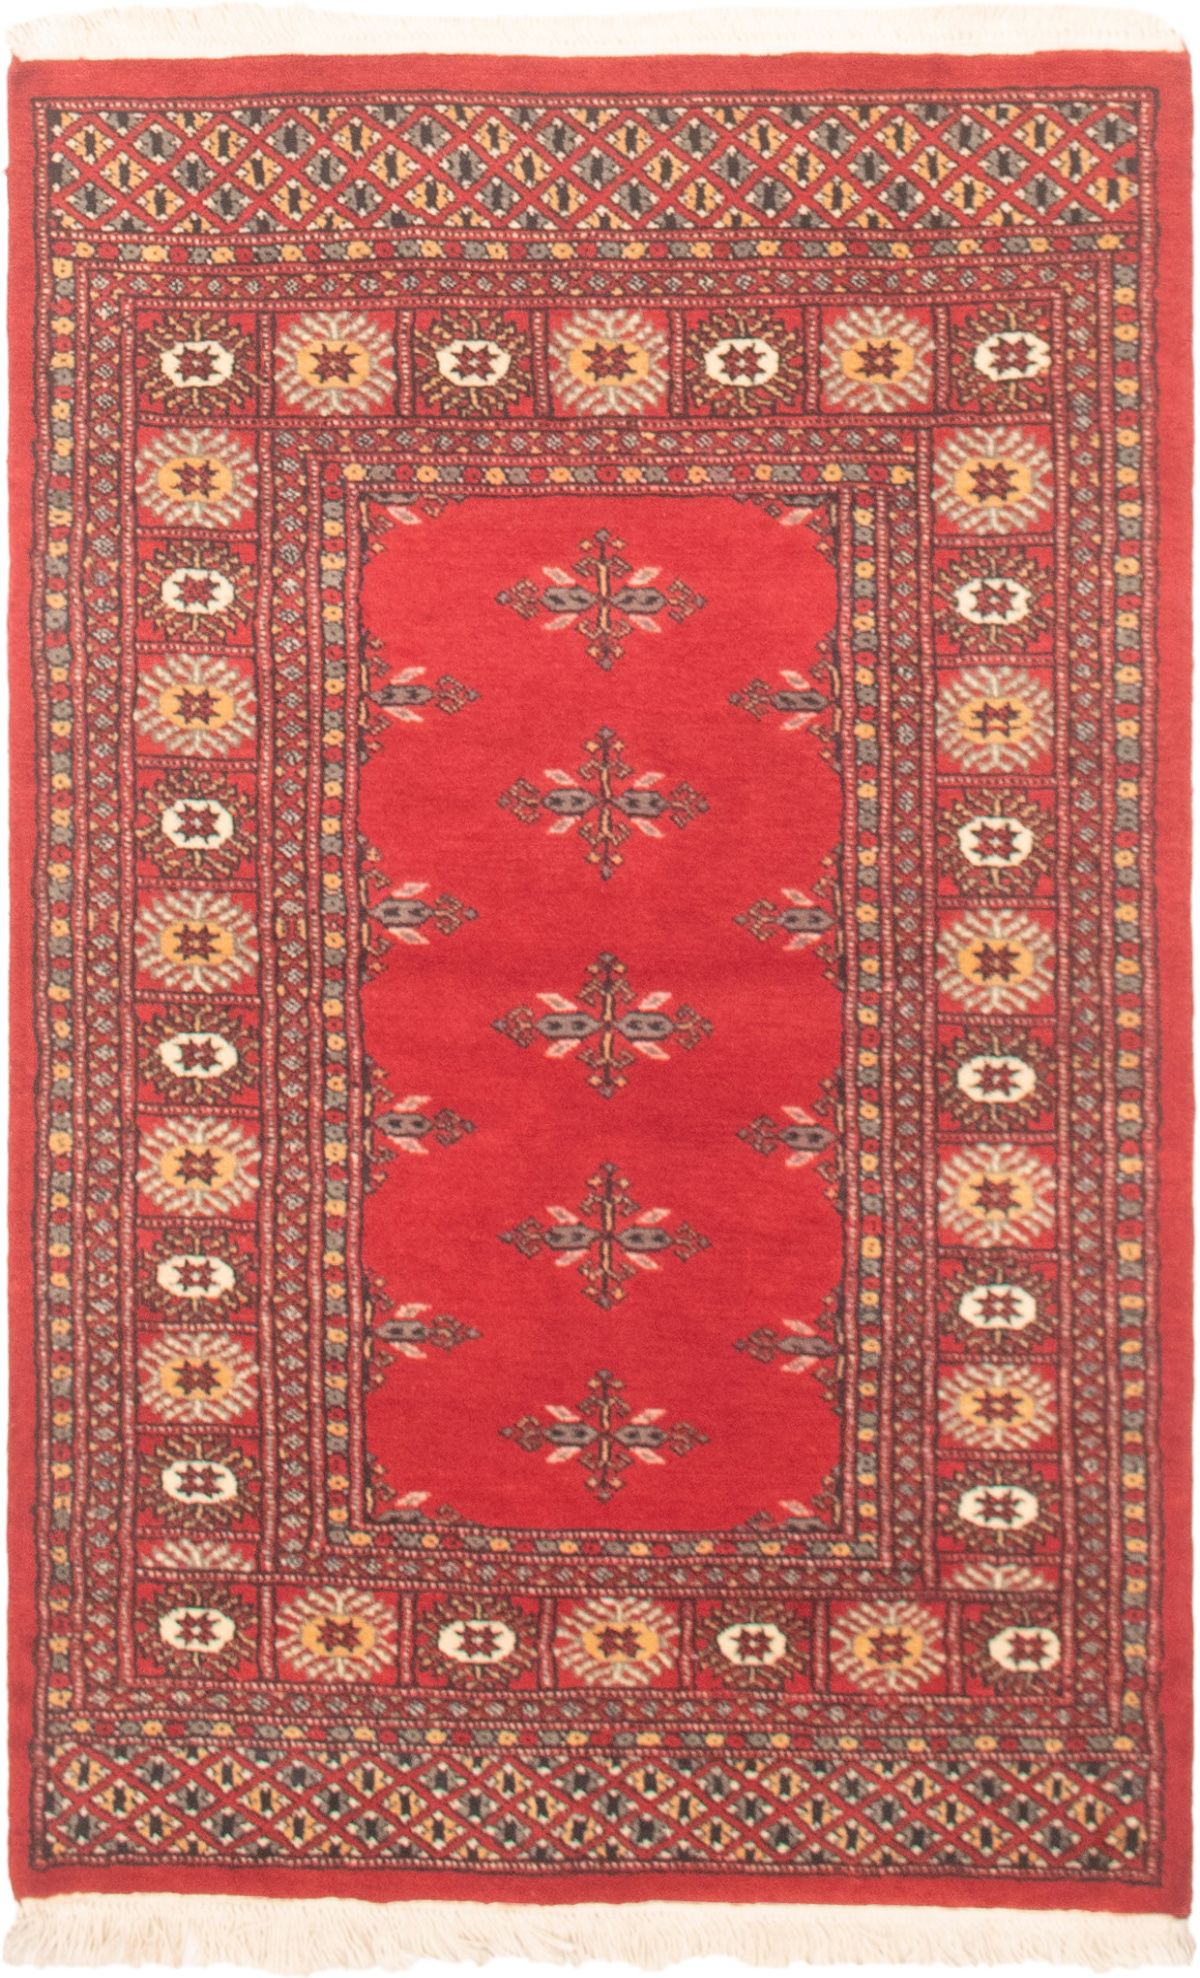 Hand-knotted Finest Peshawar Bokhara Red Wool Rug 3'2" x 5'1"  Size: 3'2" x 5'1"  